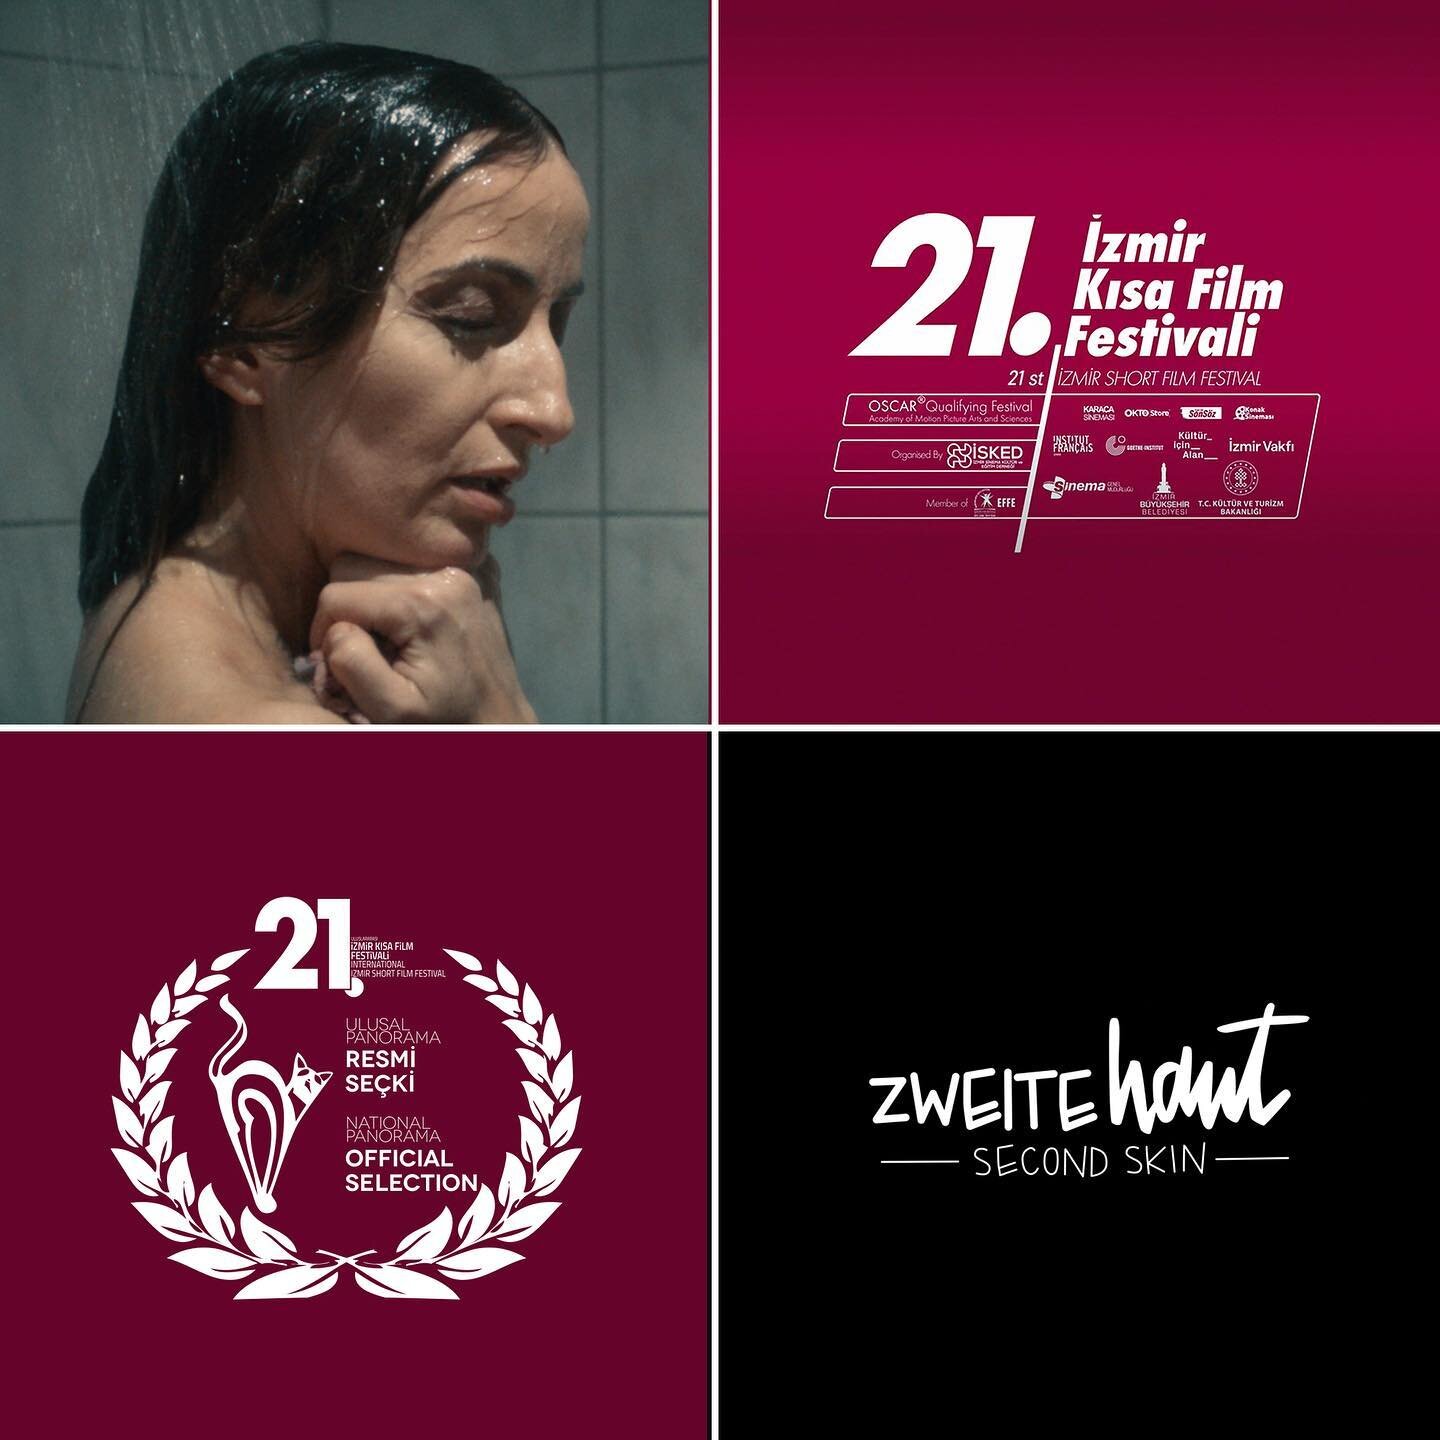 Last week our movie SECOND SKIN was shown at the Izmir International Film Festival 🇹🇷 Though this year&rsquo;s edition had to take place online, the festival team managed to bring the filmmakers together and created a wonderful atmosphere with the 